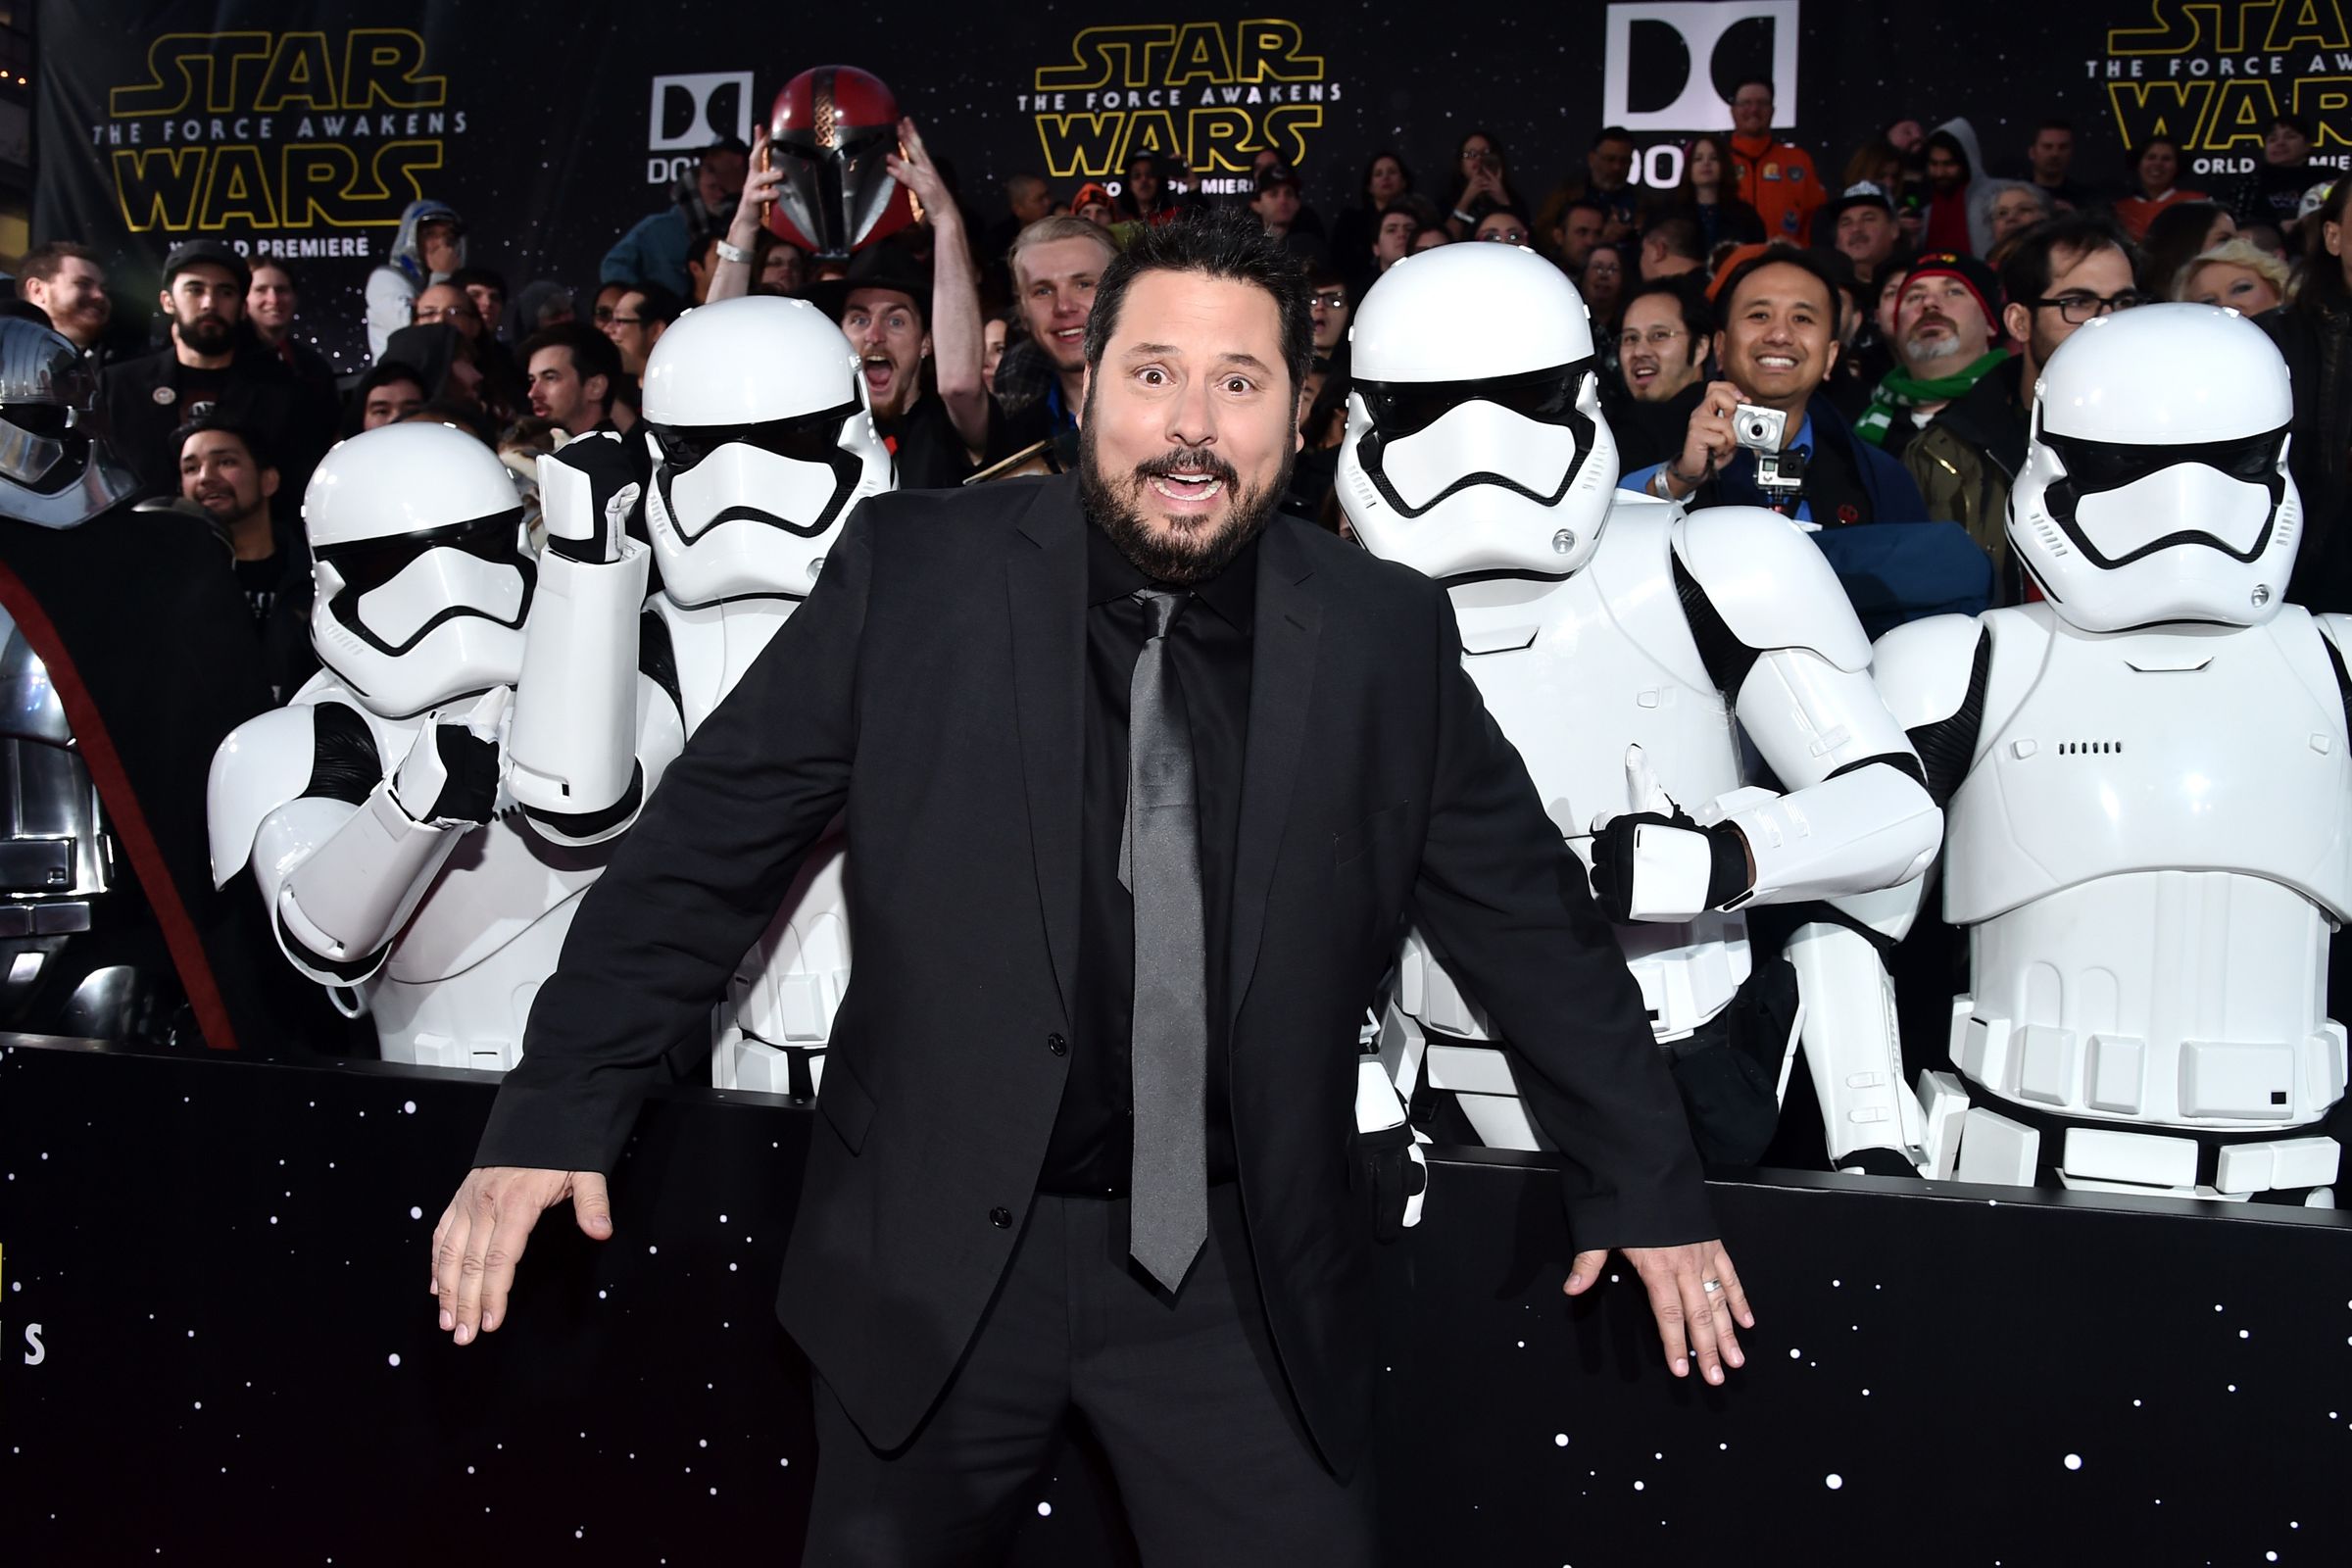 Premiere Of “Star Wars: The Force Awakens” - Red Carpet